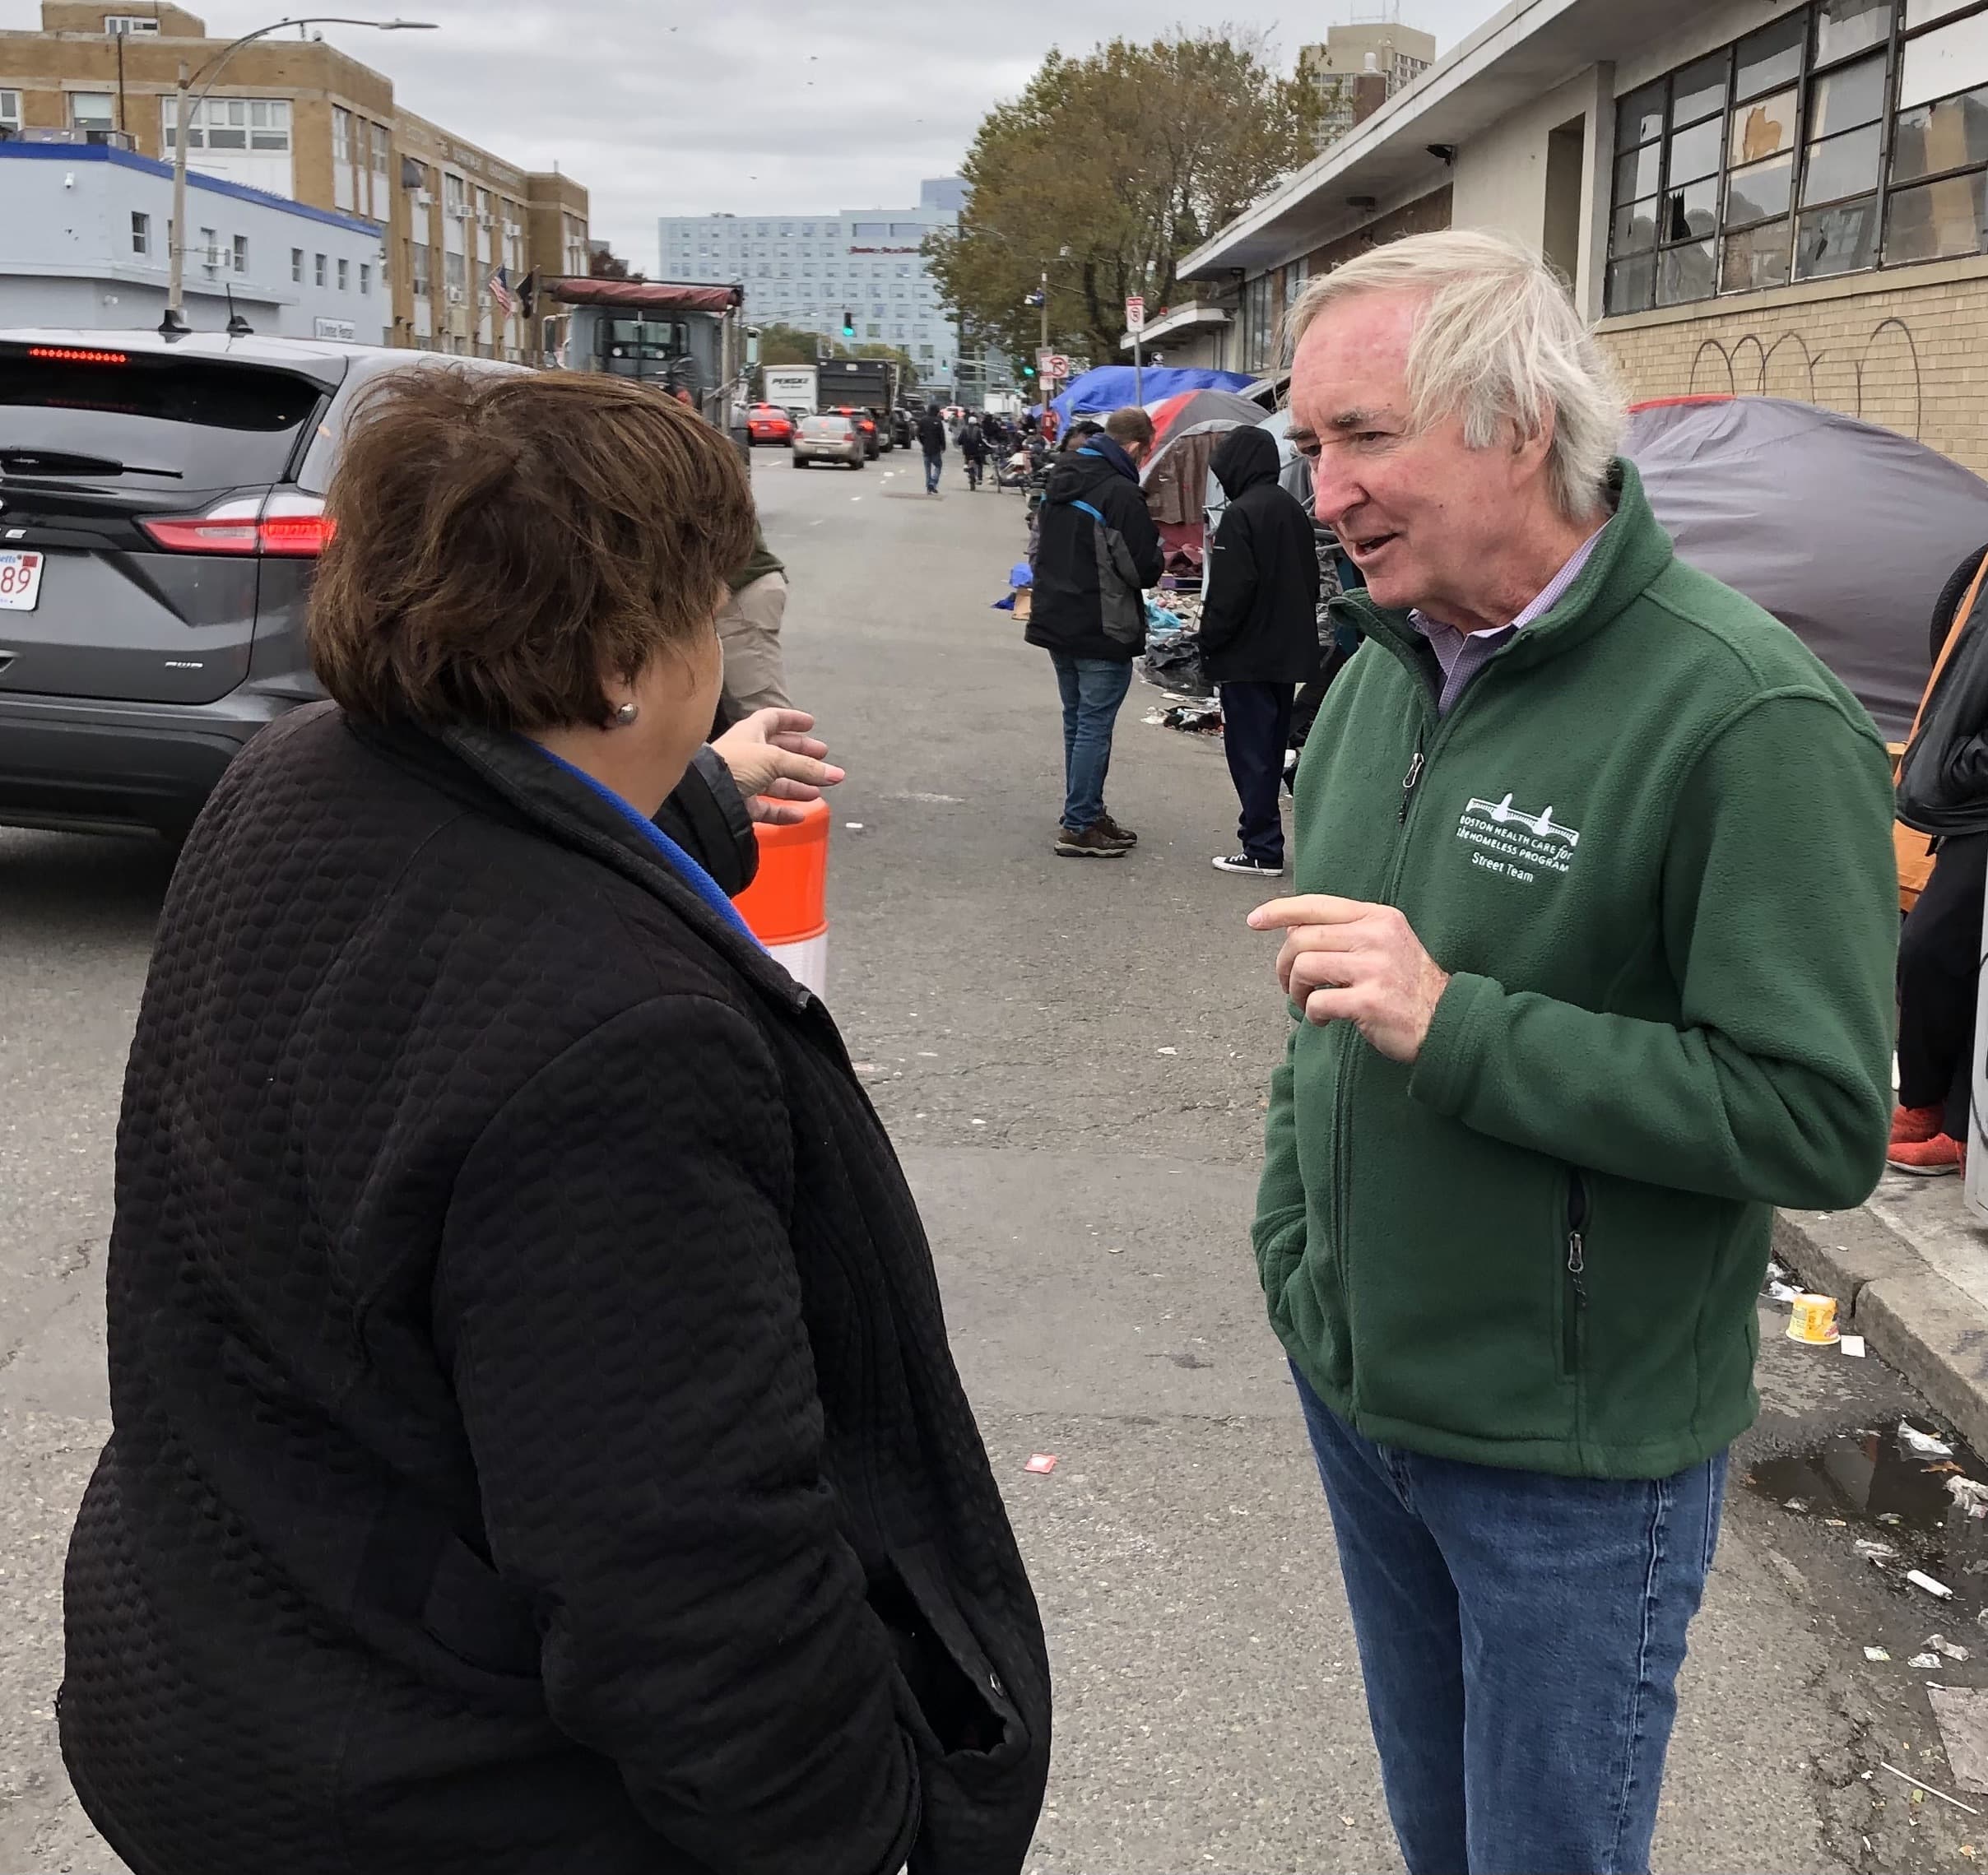 Dr. Jim O’Connell, president of Boston Health Care for the Homeless Program, talks with Sue Sullivan, executive director of the Newmarket Business Association, who approached him to ask about his thoughts on the homelessness crisis. (Lynn Jolicoeur/WBUR)